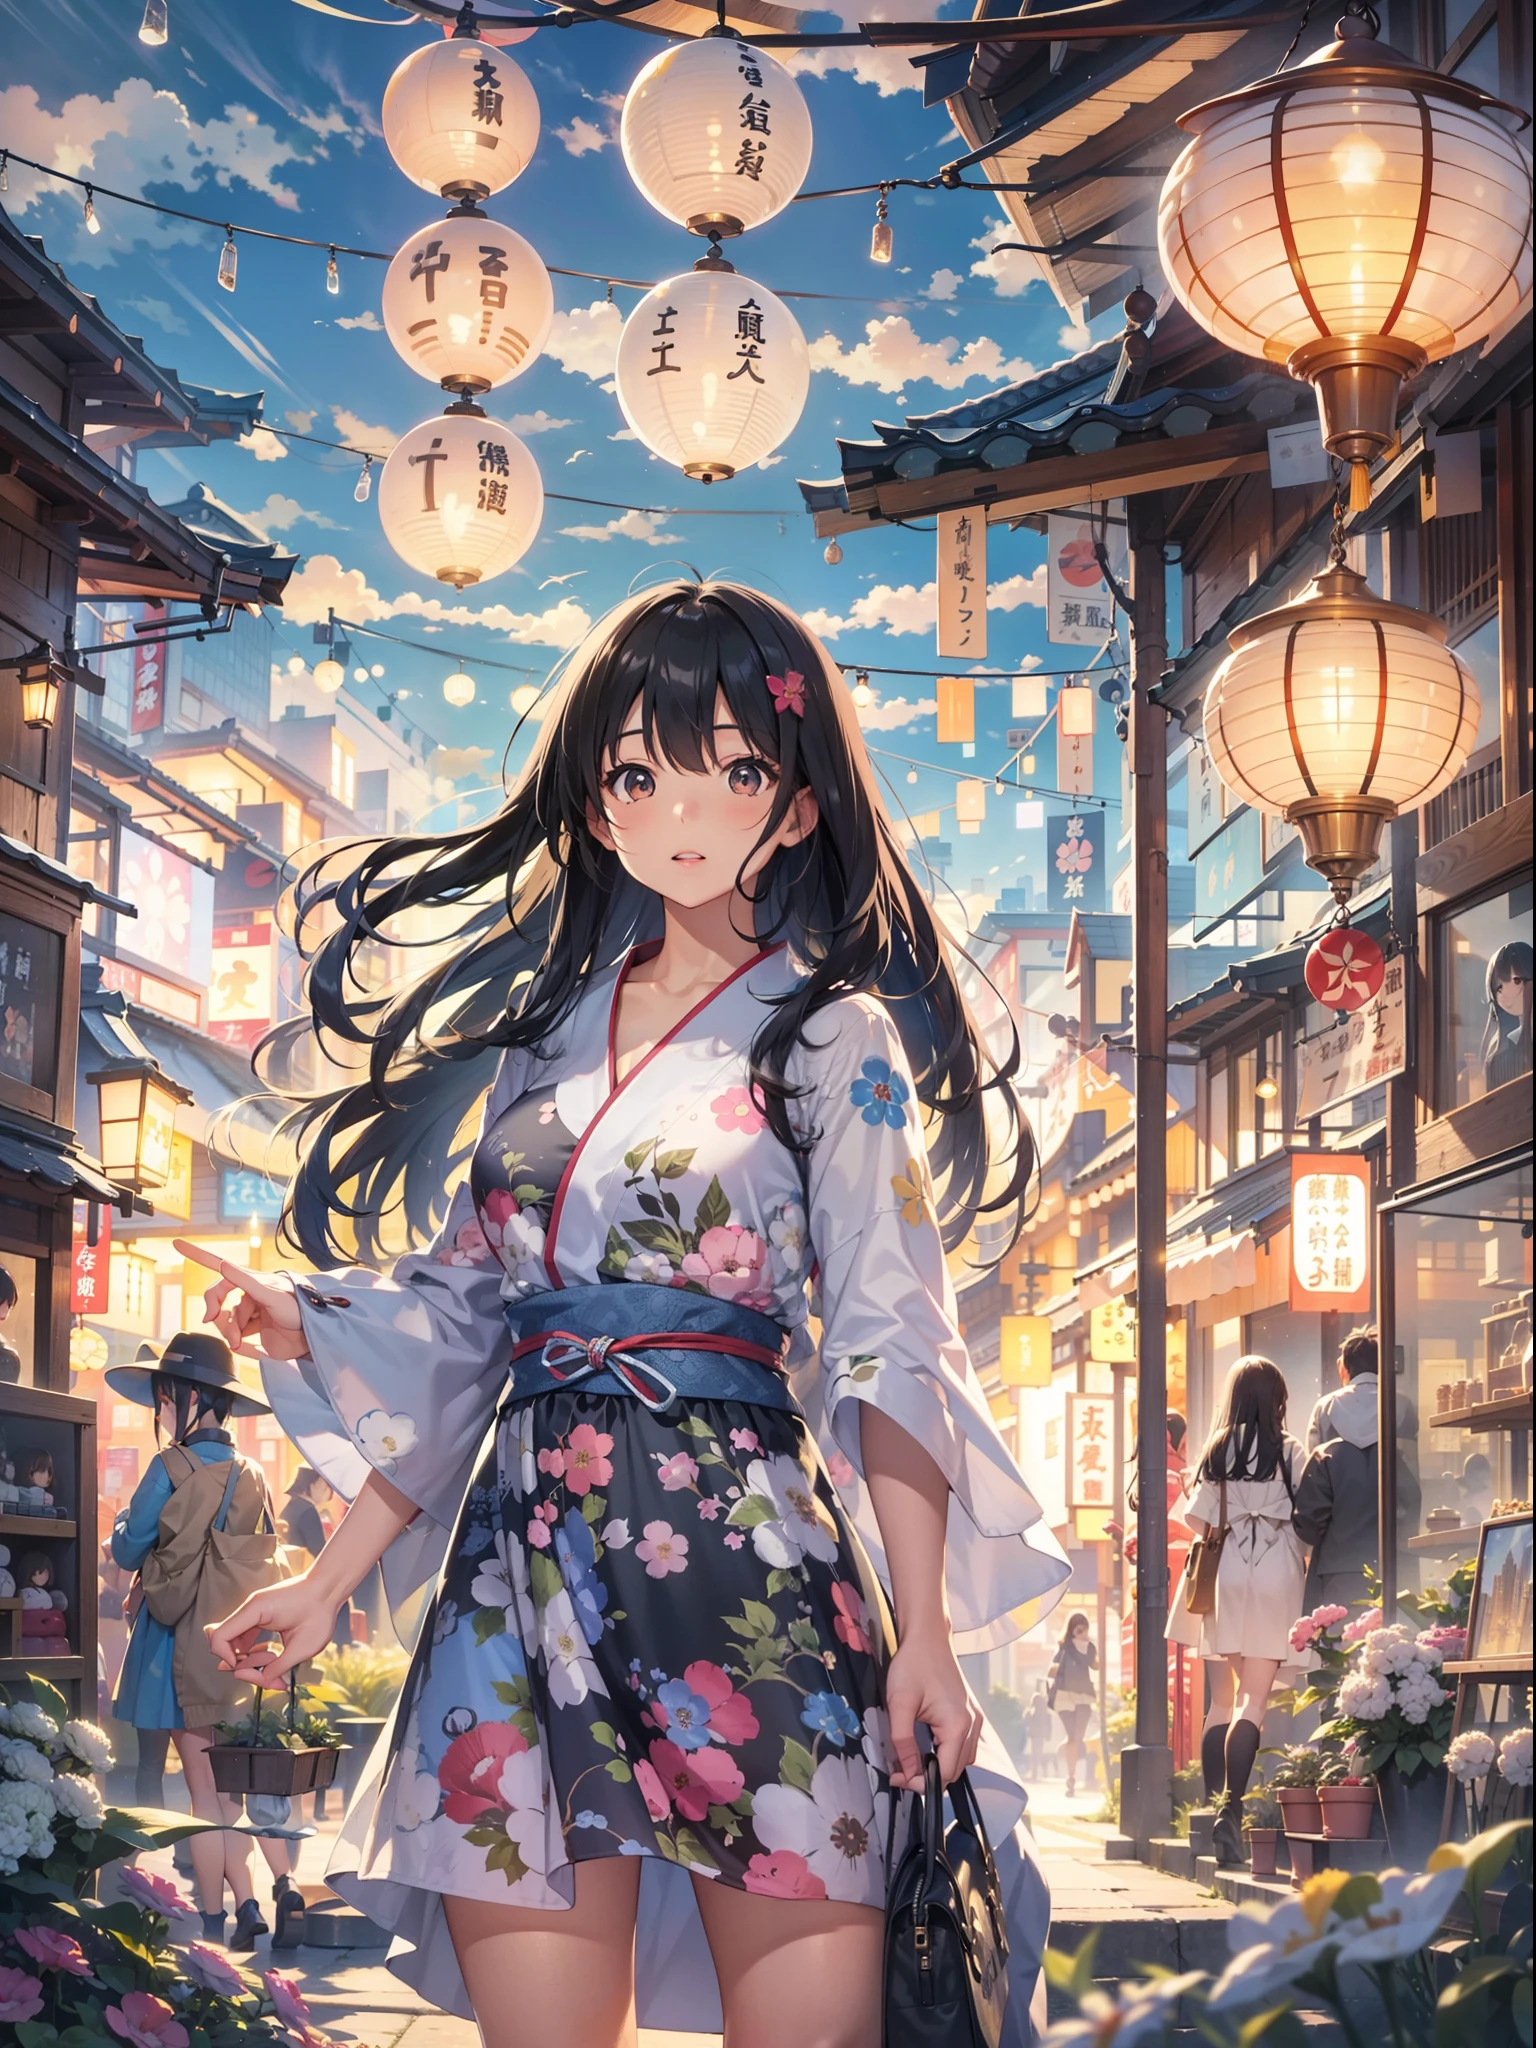 Top image quality　Original Characters、City Girl、summer clothing、Long Black Hair、A city made up of Japan glass wind chimes、Giant Entrance Cloud、evening glow